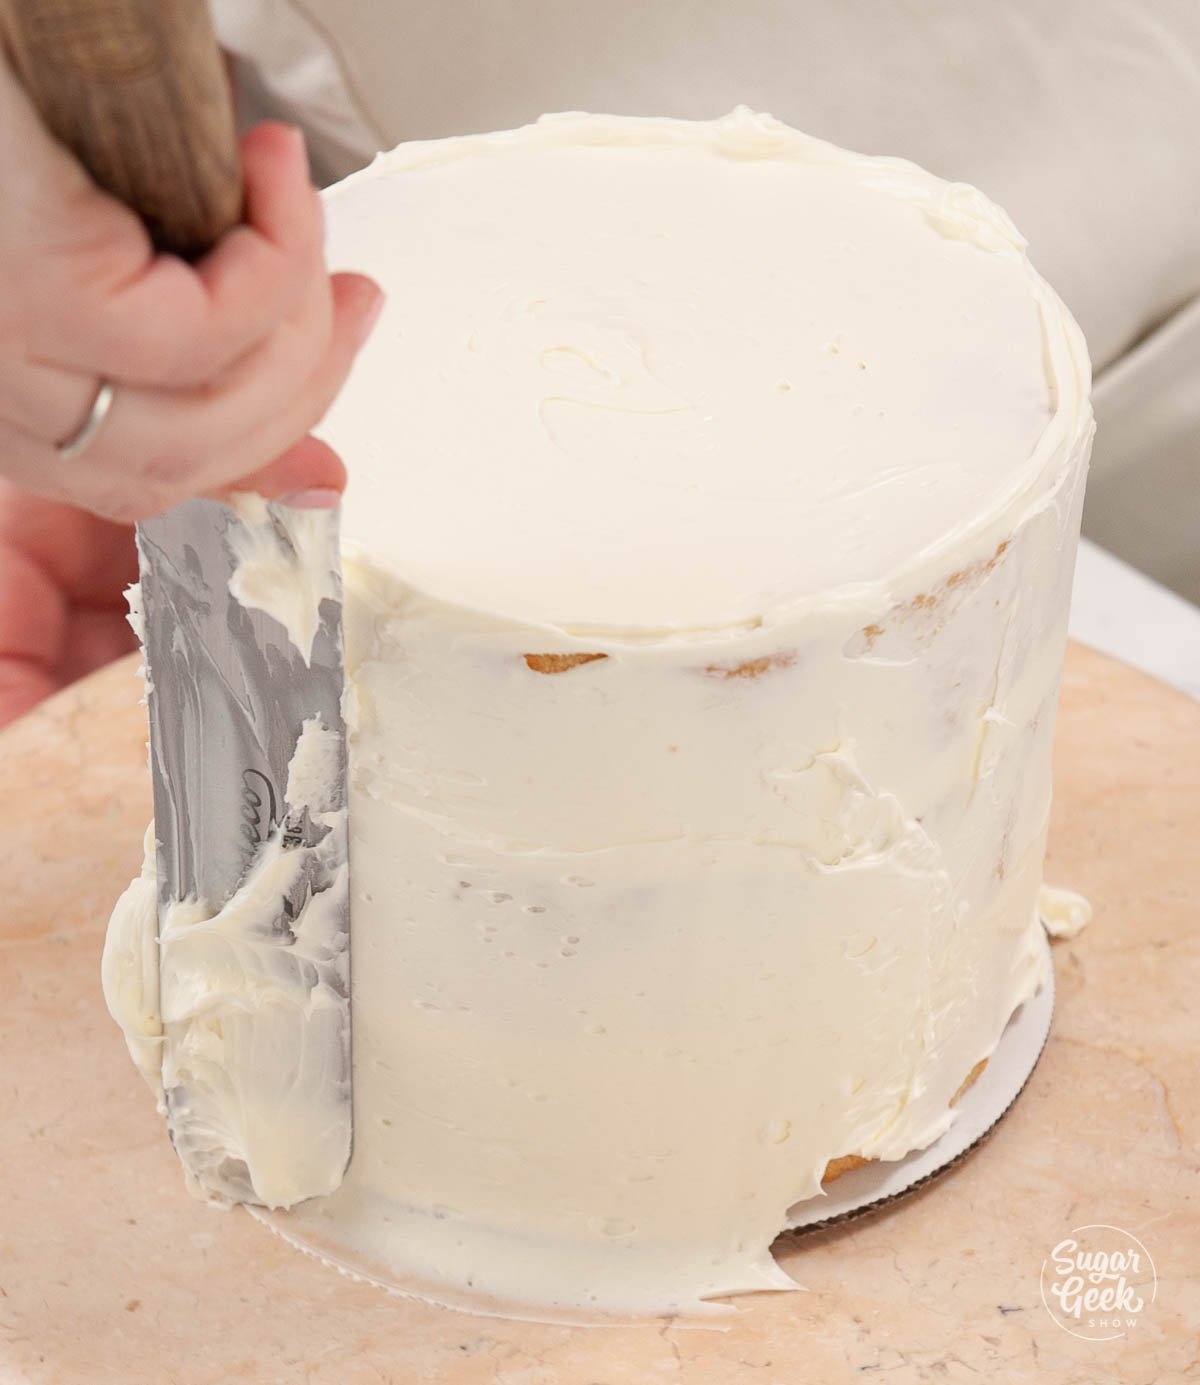 applying a crumbcoat of buttercream to the cake with an offset spatula